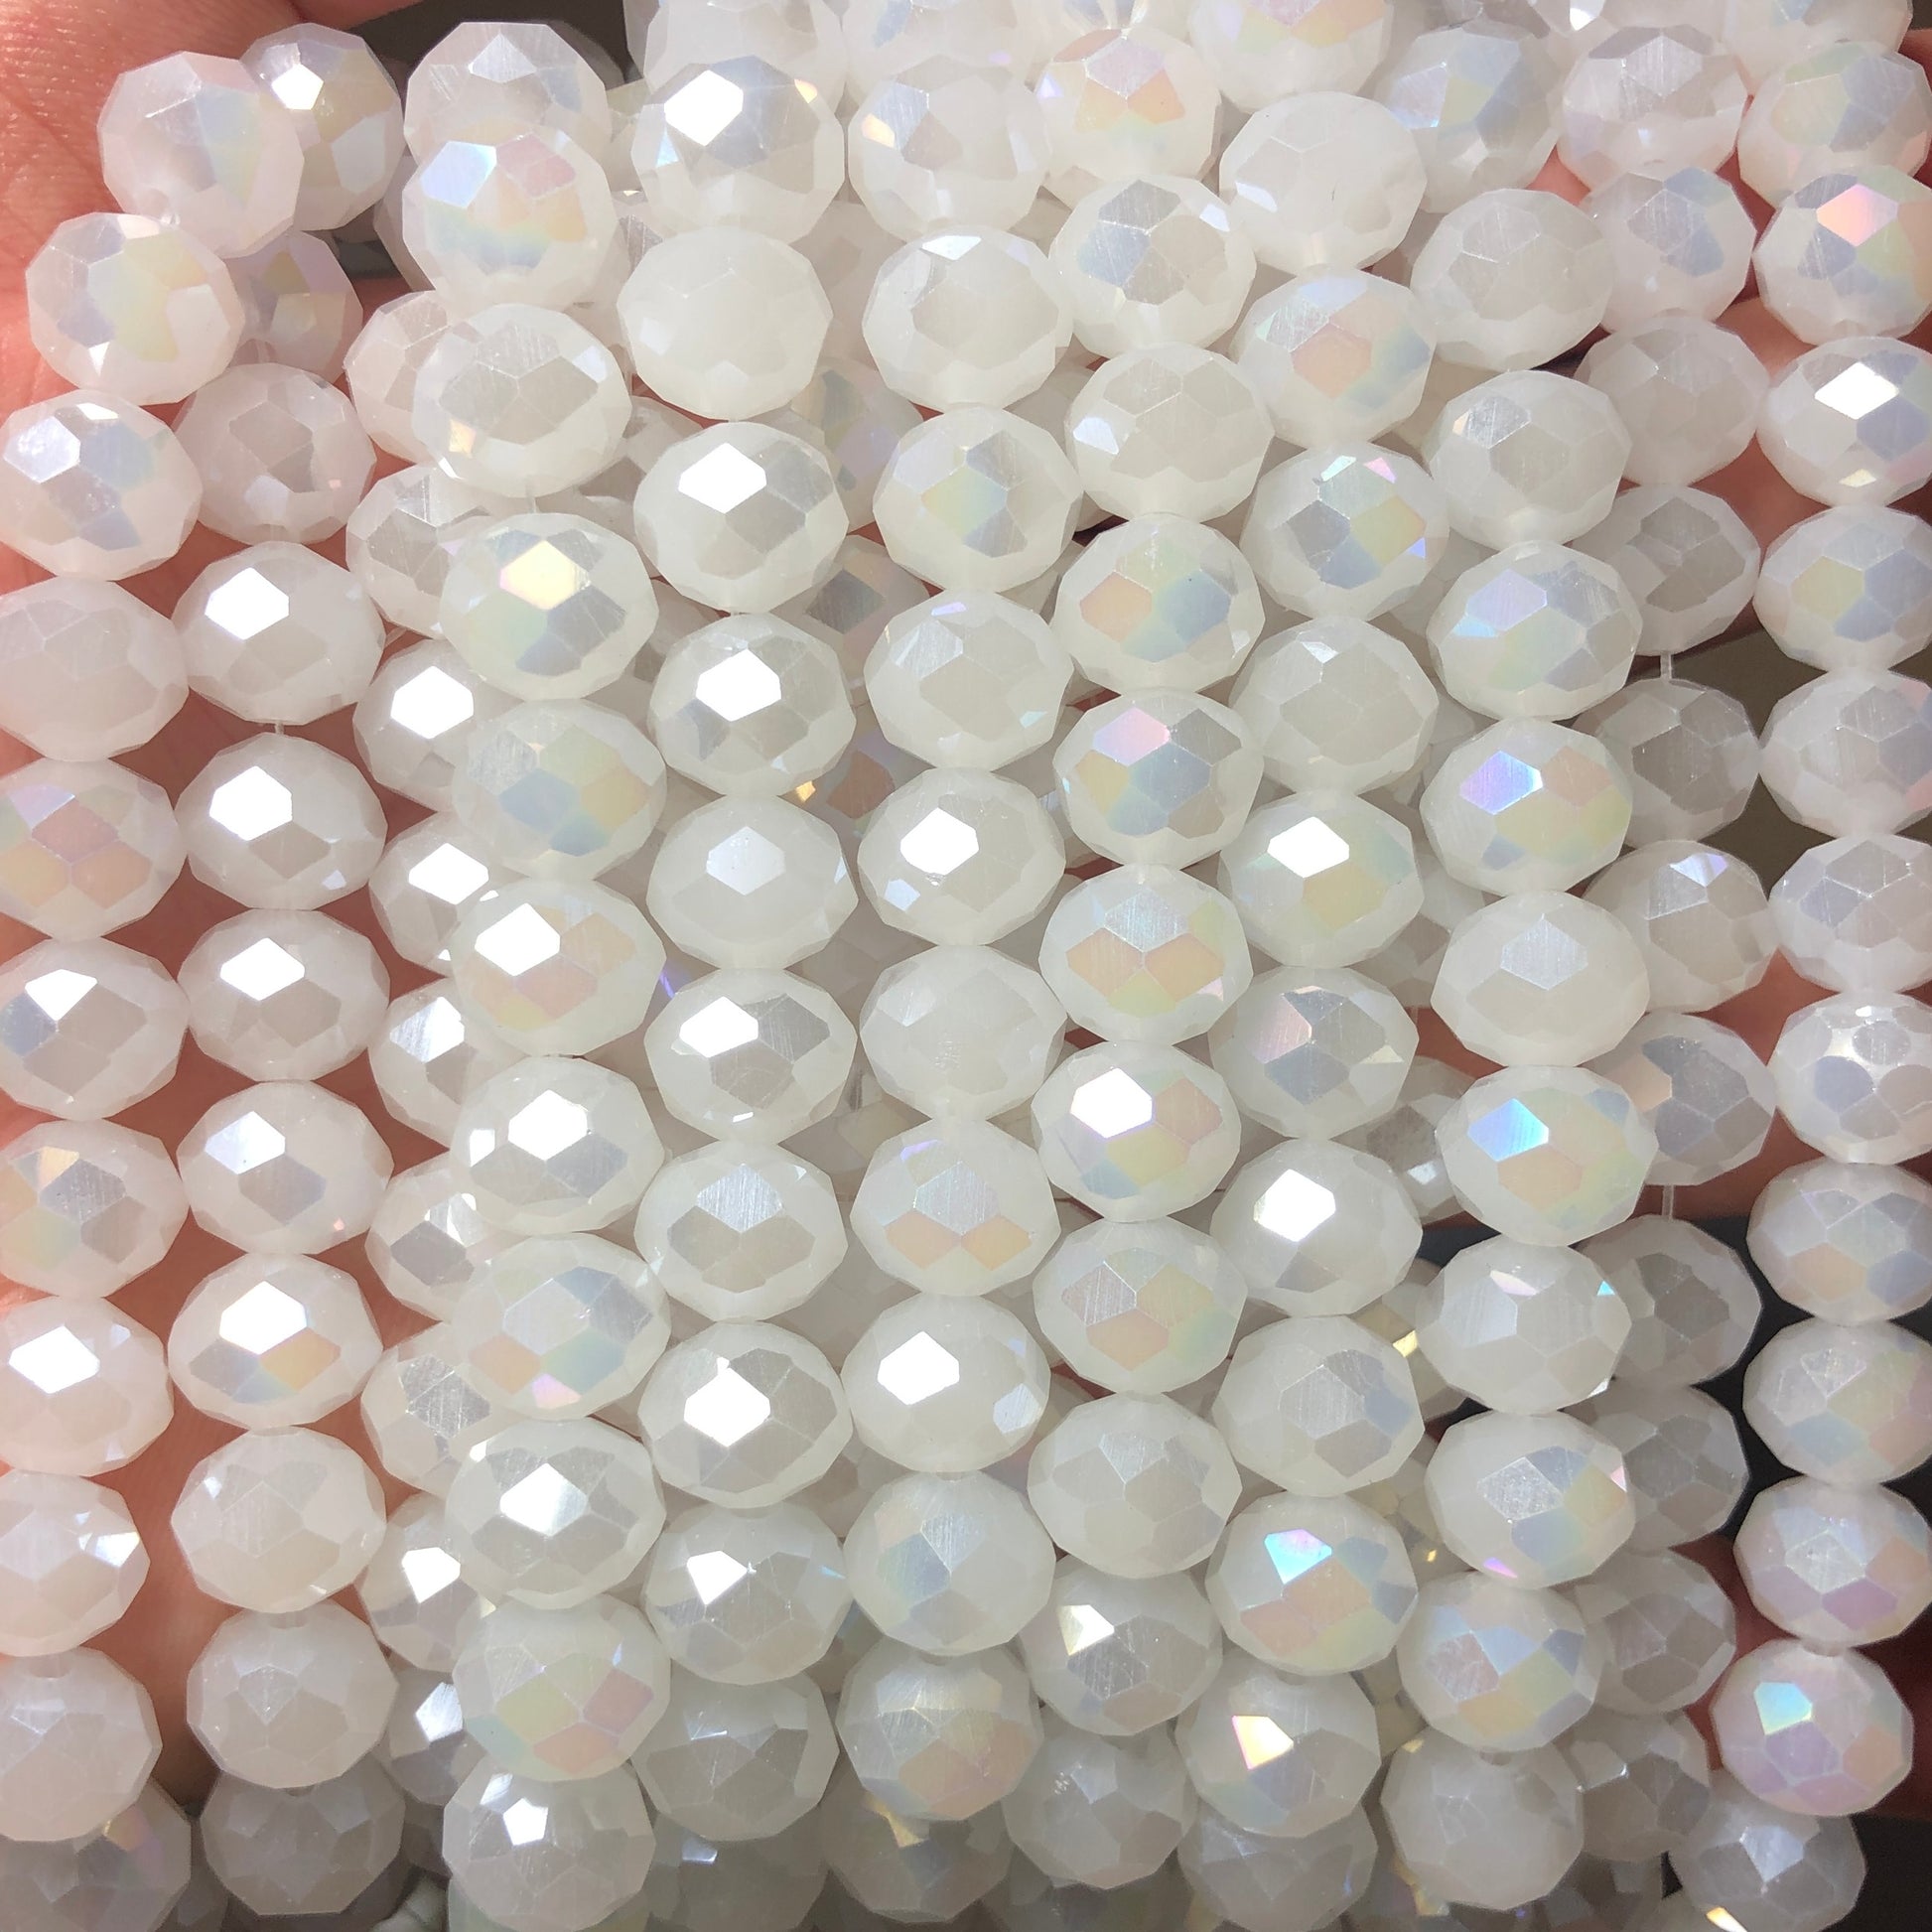 2 Strands/lot 10mm White AB Faceted Glass Beads Glass Beads Faceted Glass Beads Charms Beads Beyond